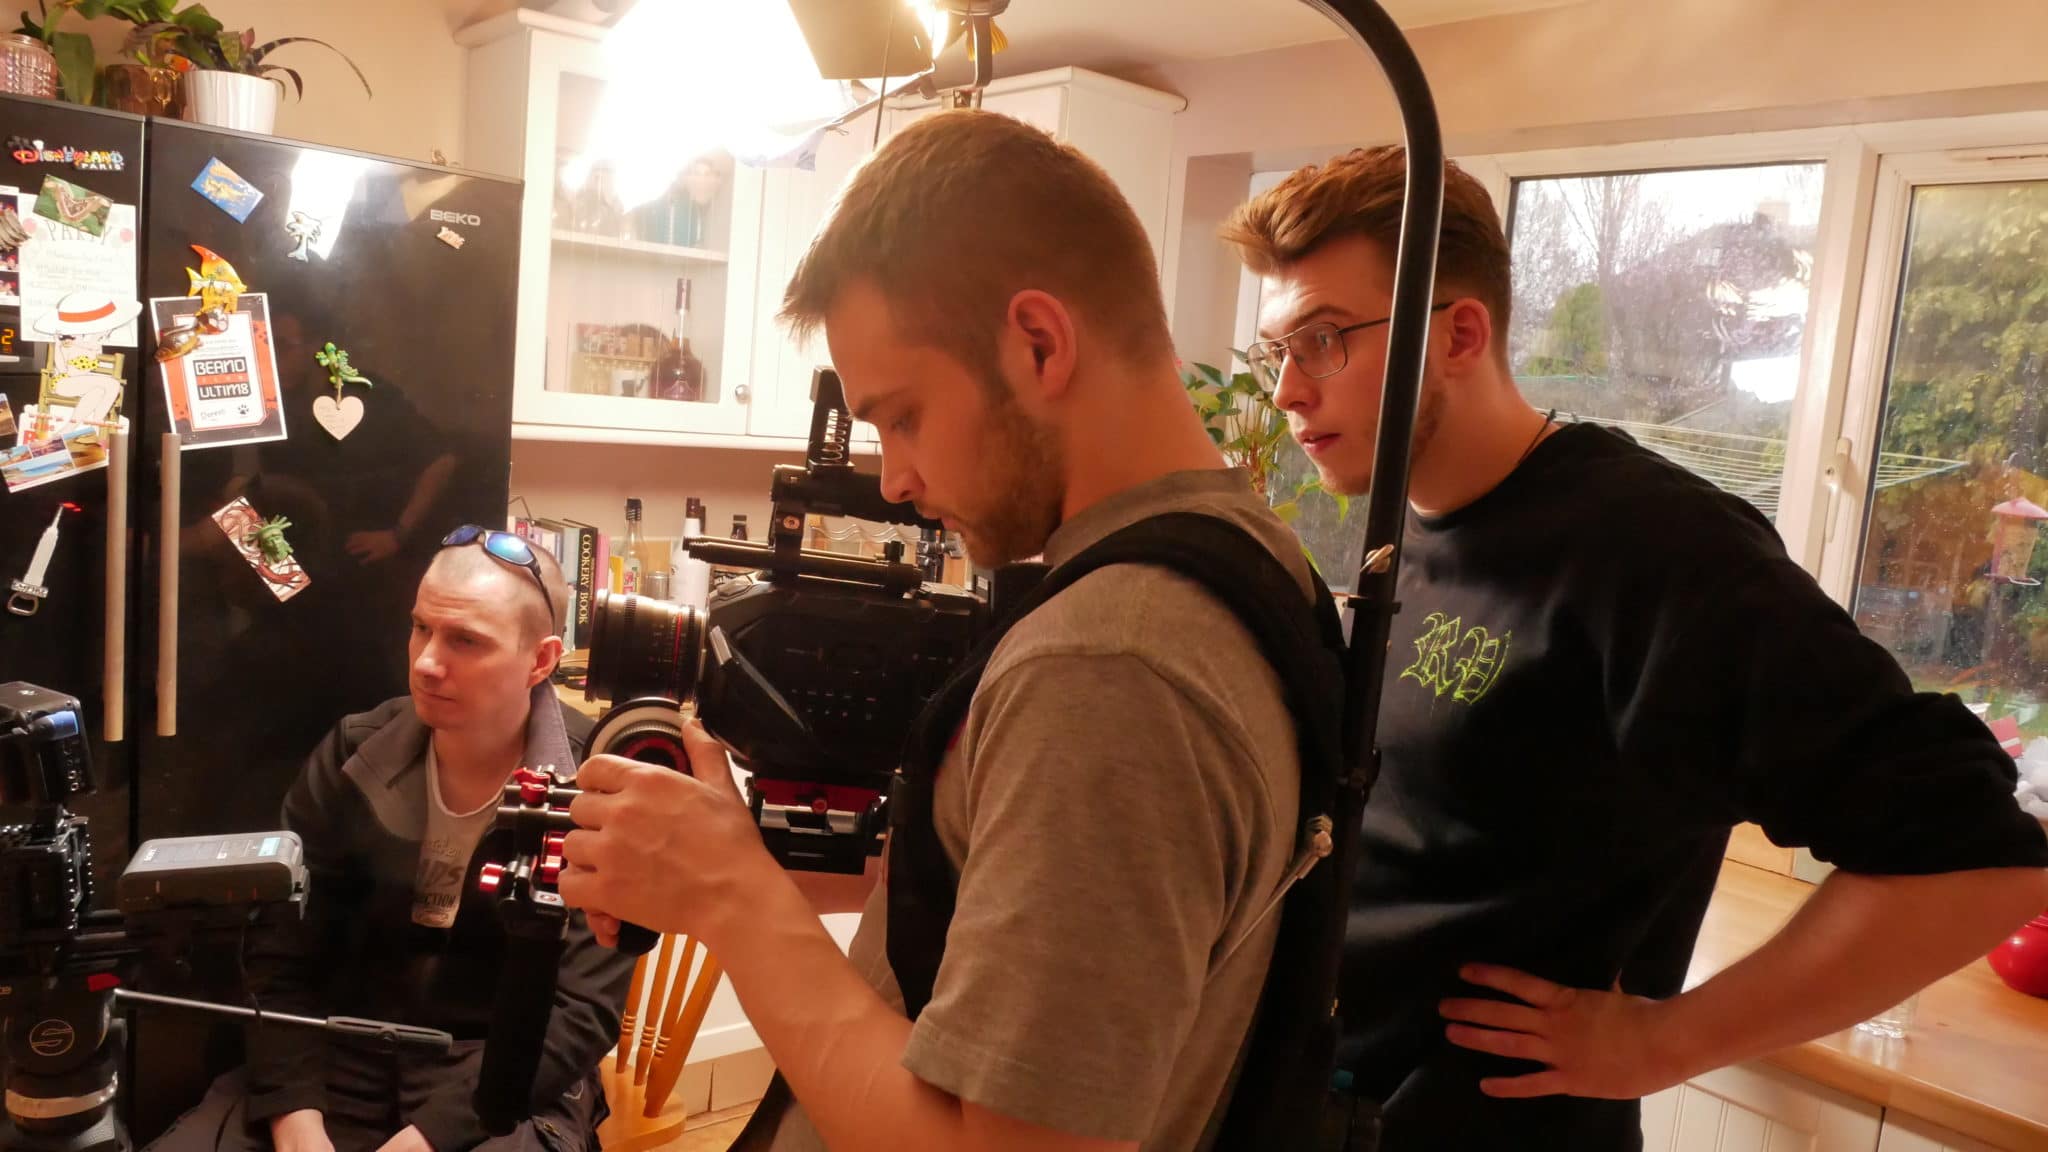 Daniel in the kitchen with a camera man filming